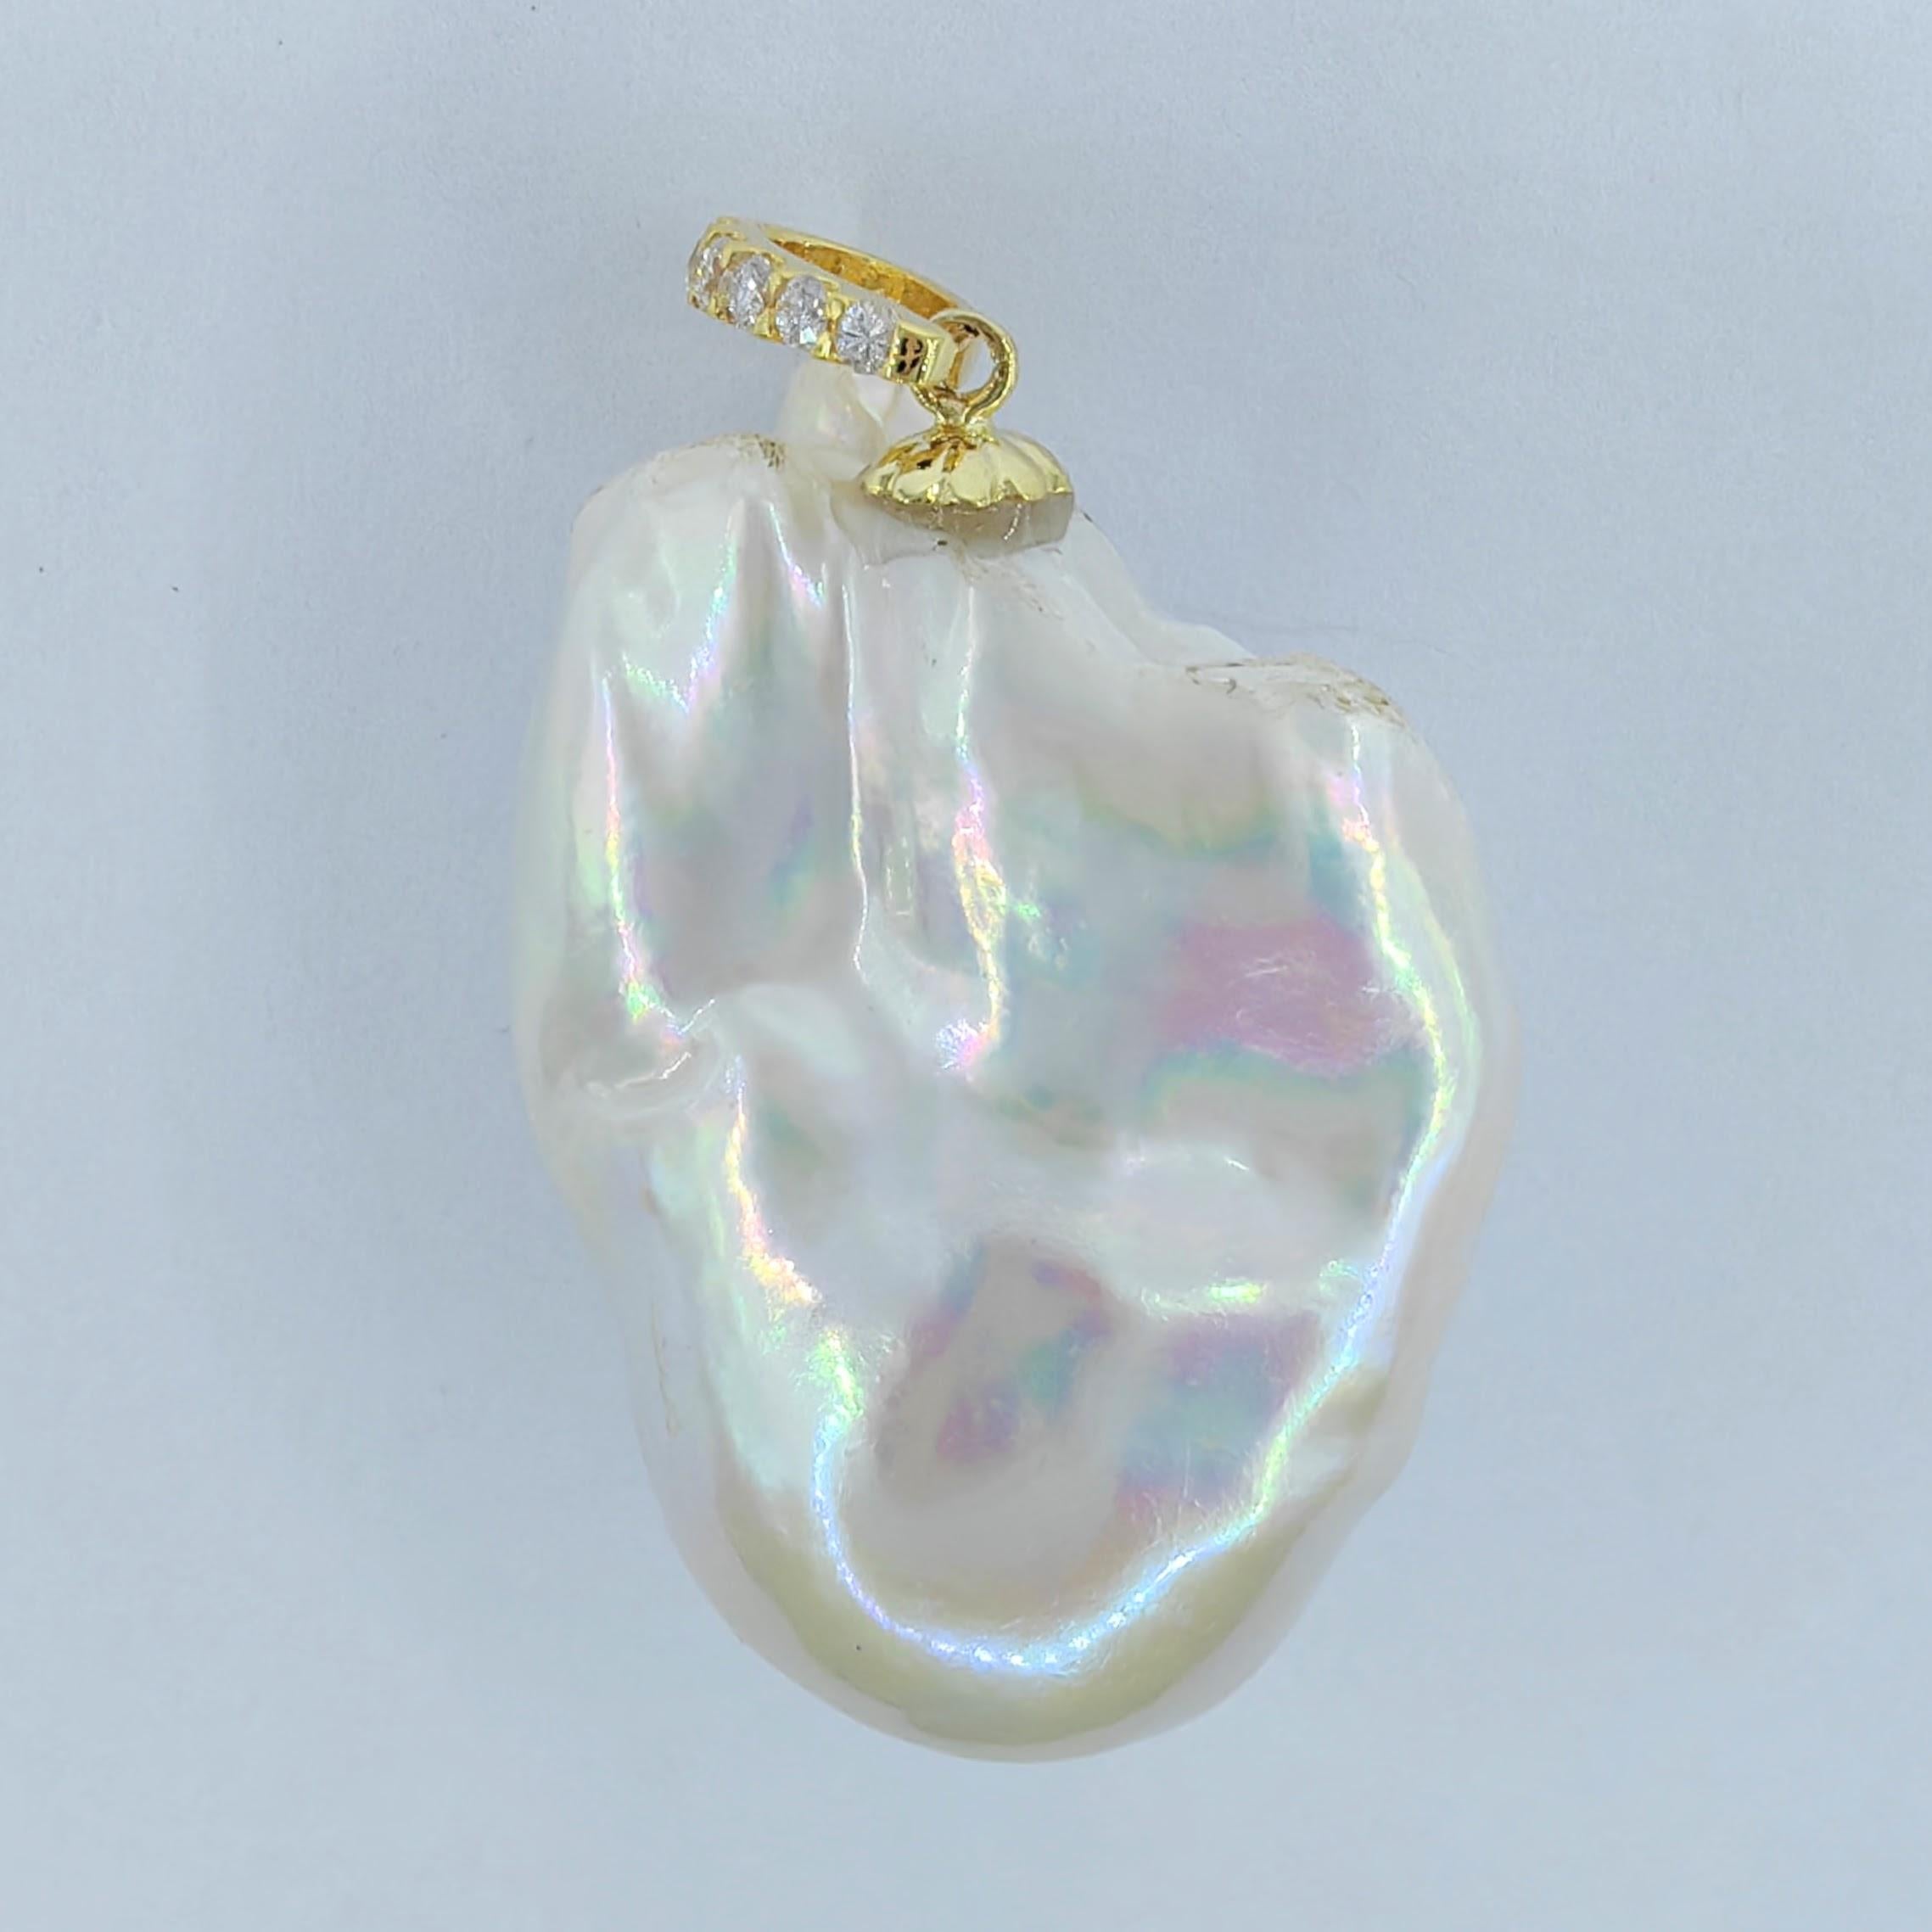 Introducing our mesmerizing 49.24ct Large Iridescent Baroque Pearl Diamond Pendant in 18K Yellow Gold. This extraordinary pendant features an extra-large Freshwater Baroque Pearl, boasting an impressive weight of 49.24 carats. Its organic and